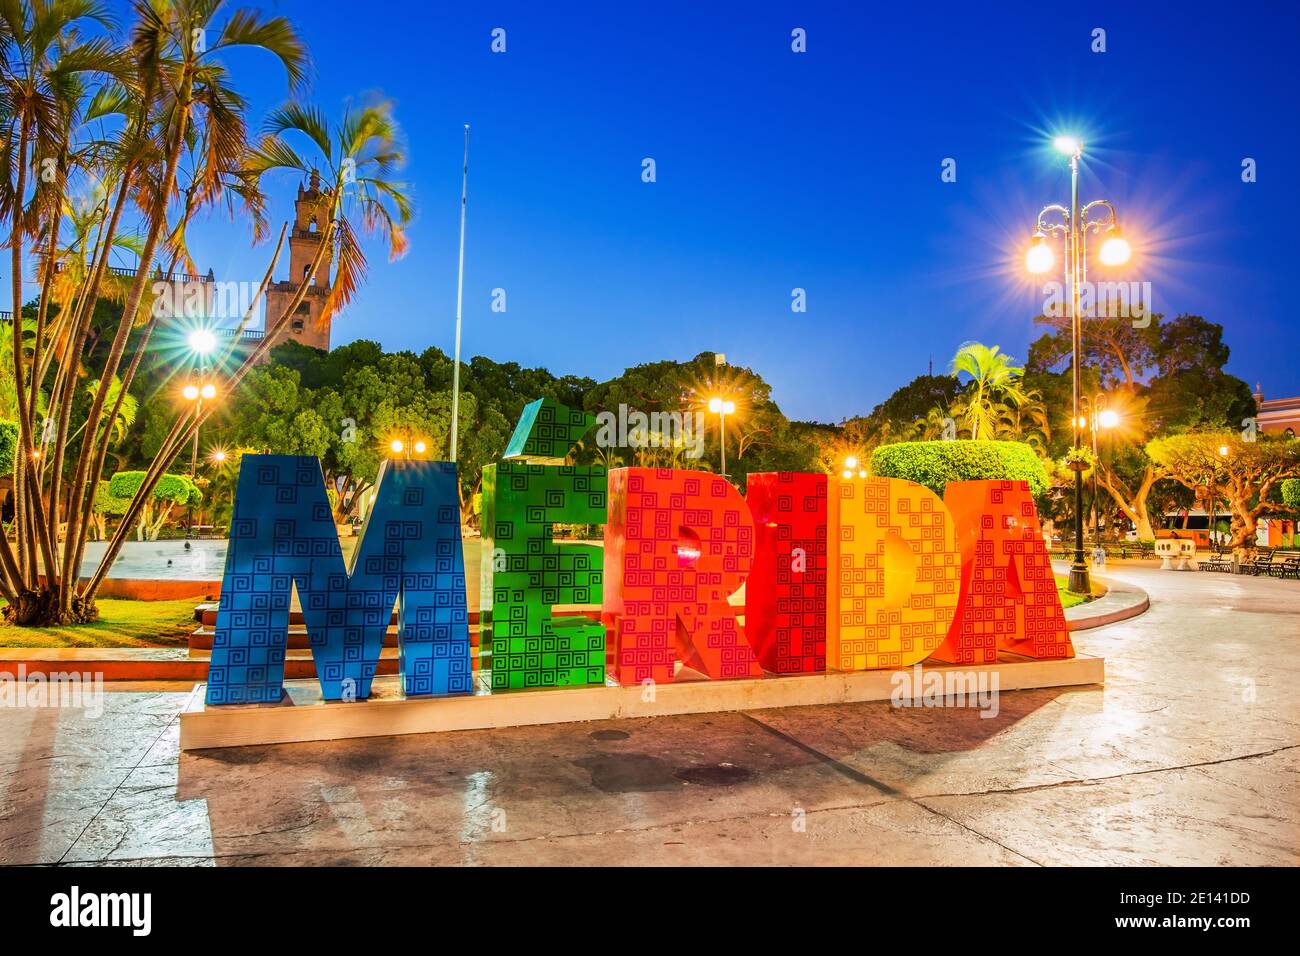 Merida, Mexico - April 23, 2019: City sign in the Old Town. Stock Photo